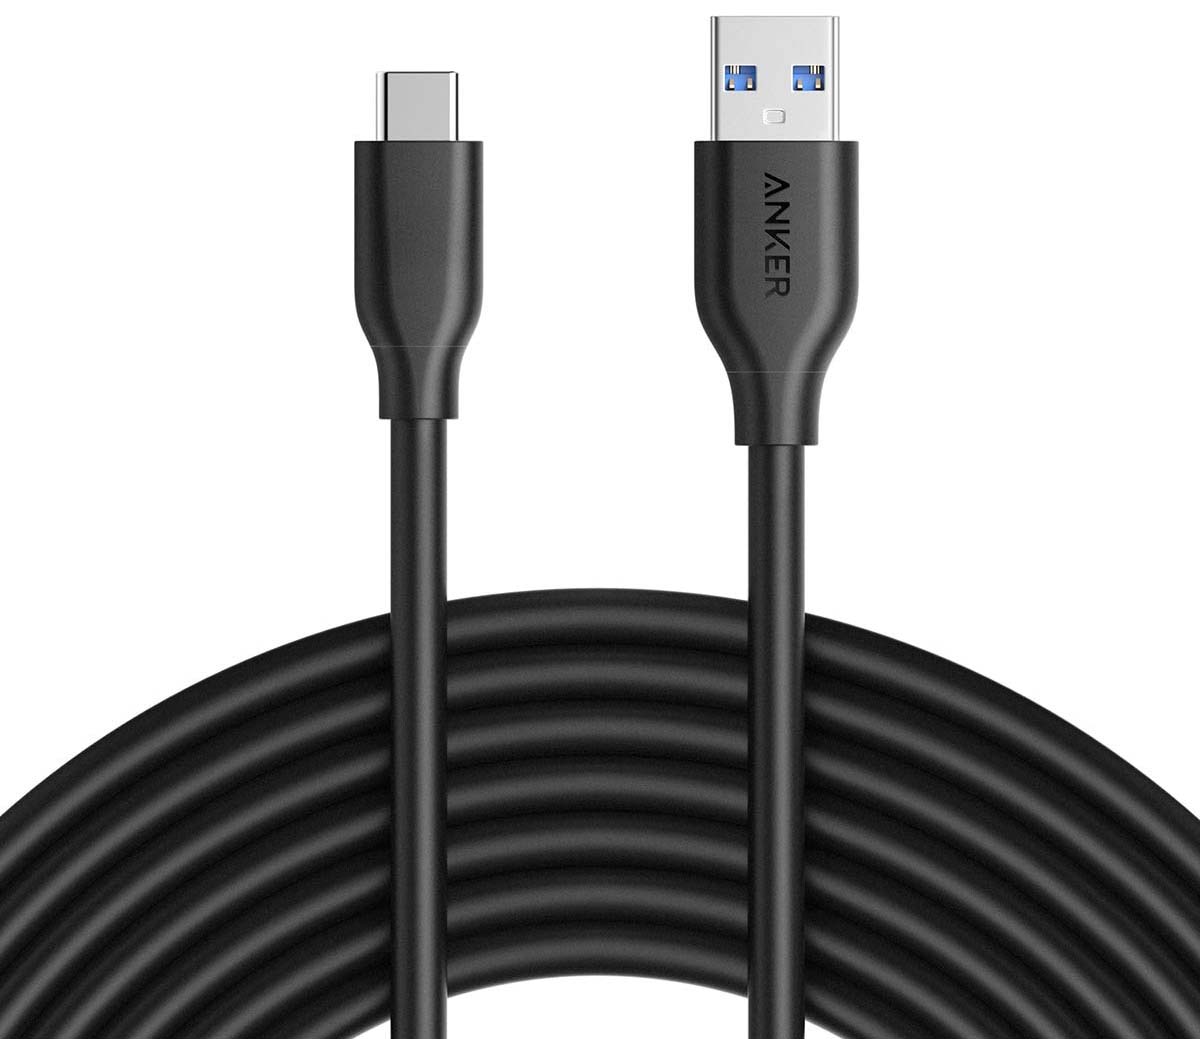 Anker Quest Link Cable